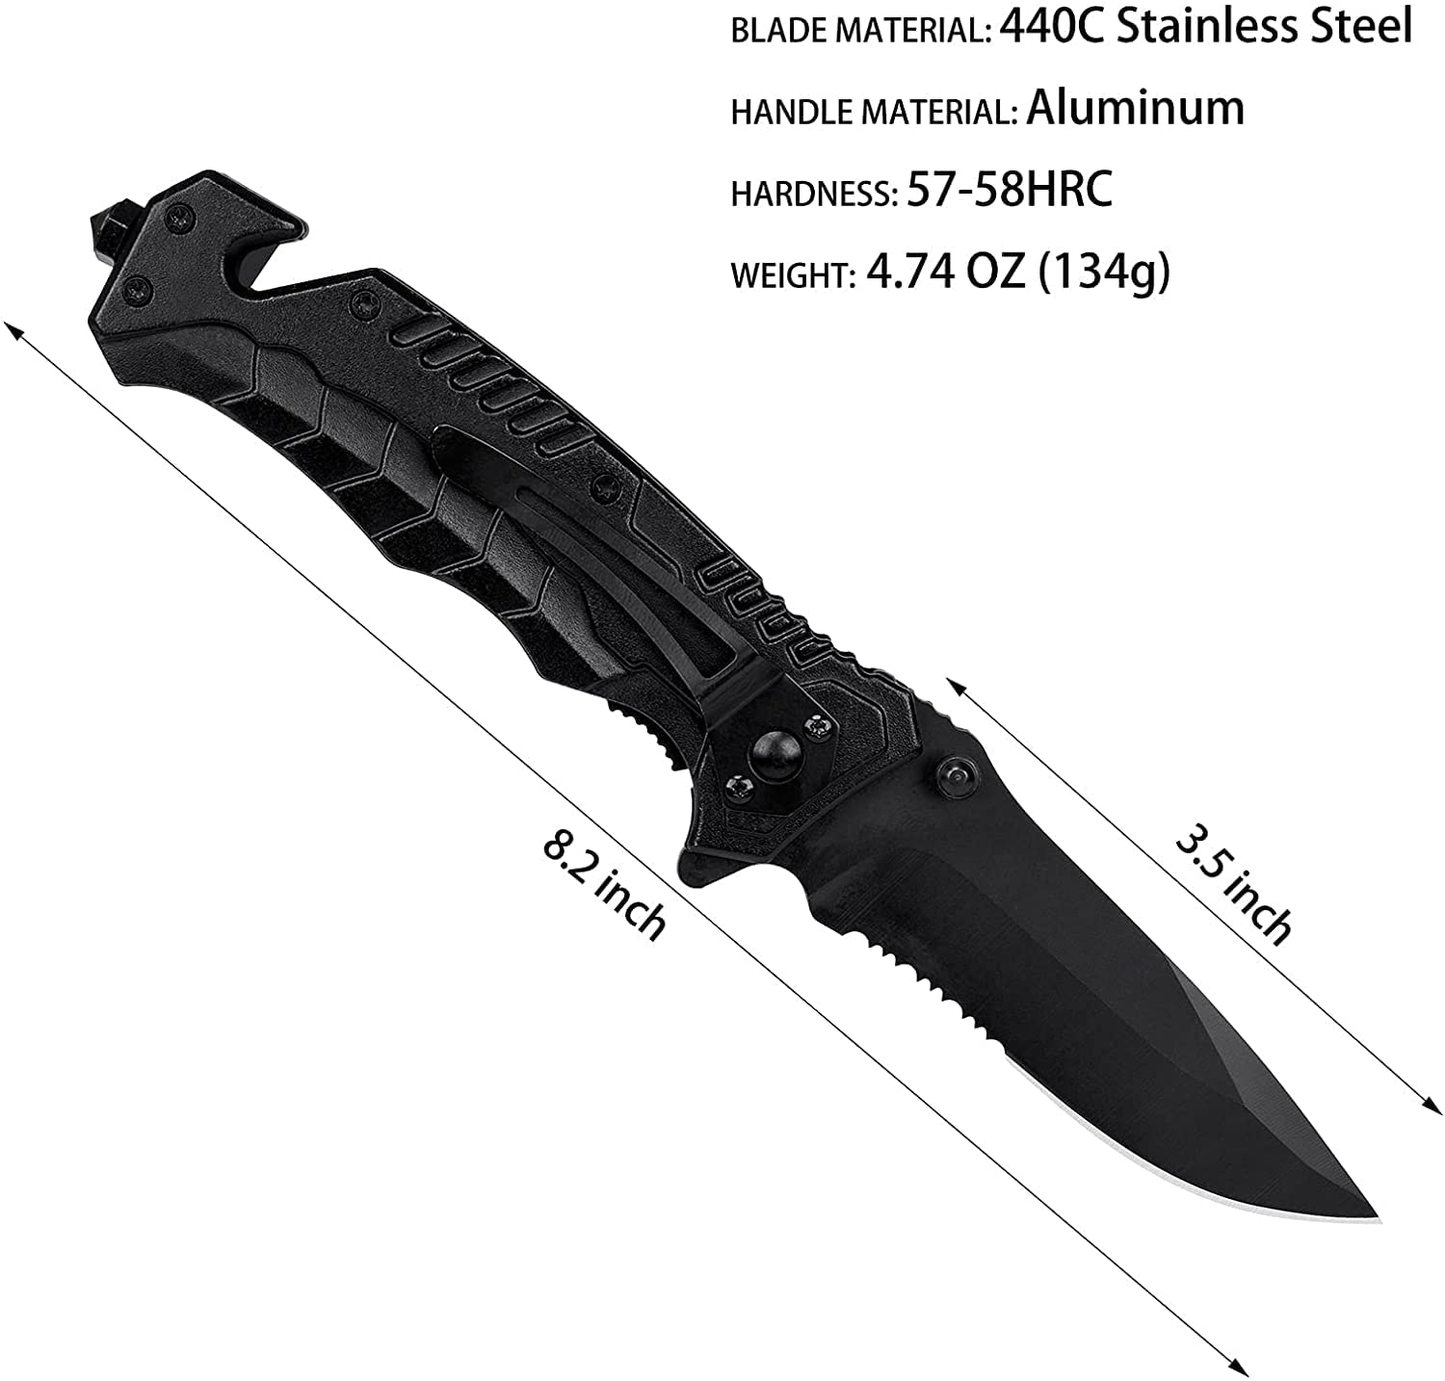 Folding Pocket Knife with Clip,Tactical Assisted Camping Knife, Multitool Military Outdoor Survival Knife Emergency EDC Knife for Men Camping Hiking Hunting Outdoor Survival Daily Use